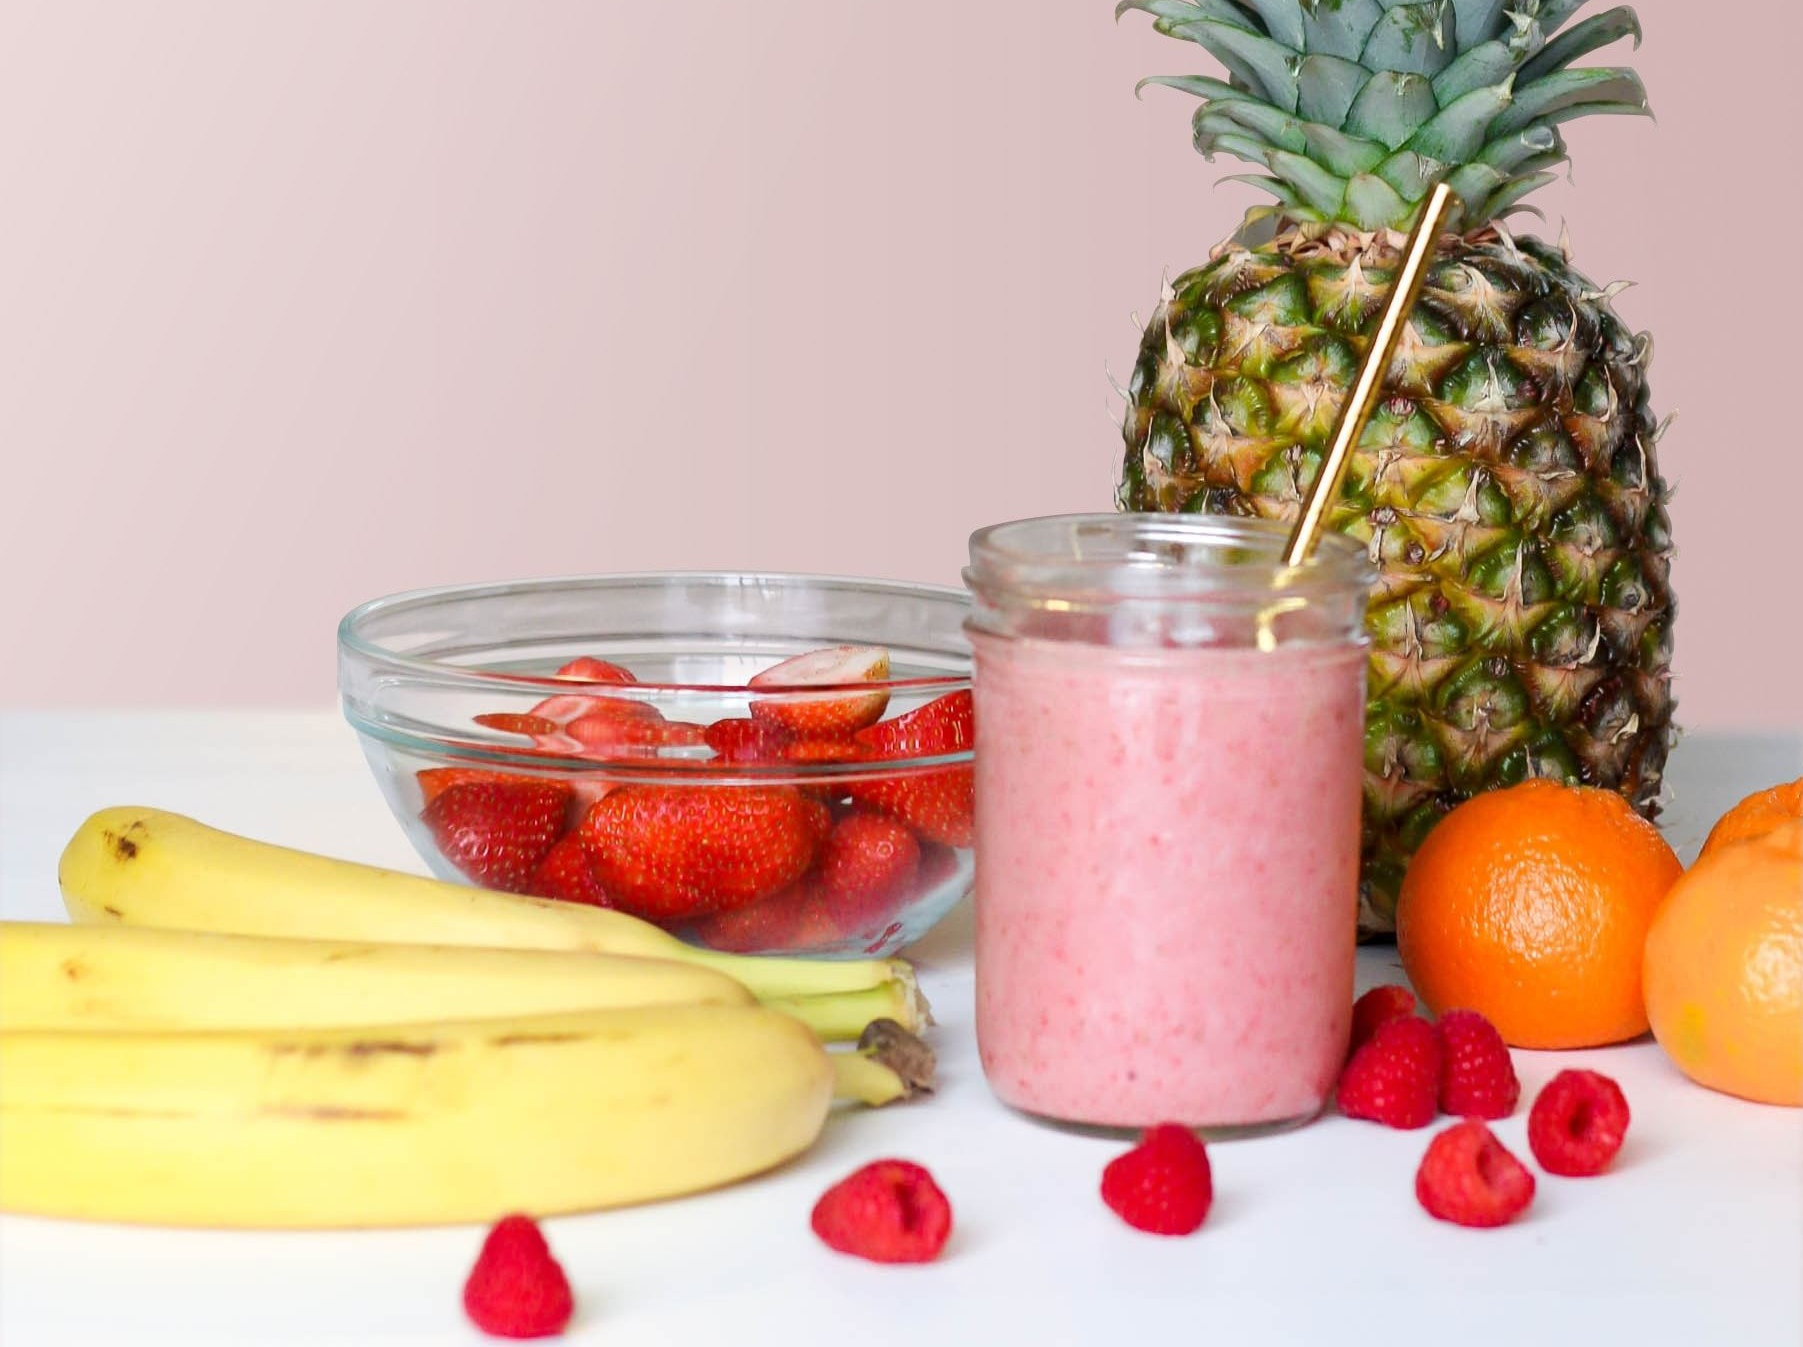 Photo of strawberries, bananas, oranges, pineapple, and a smoothie.